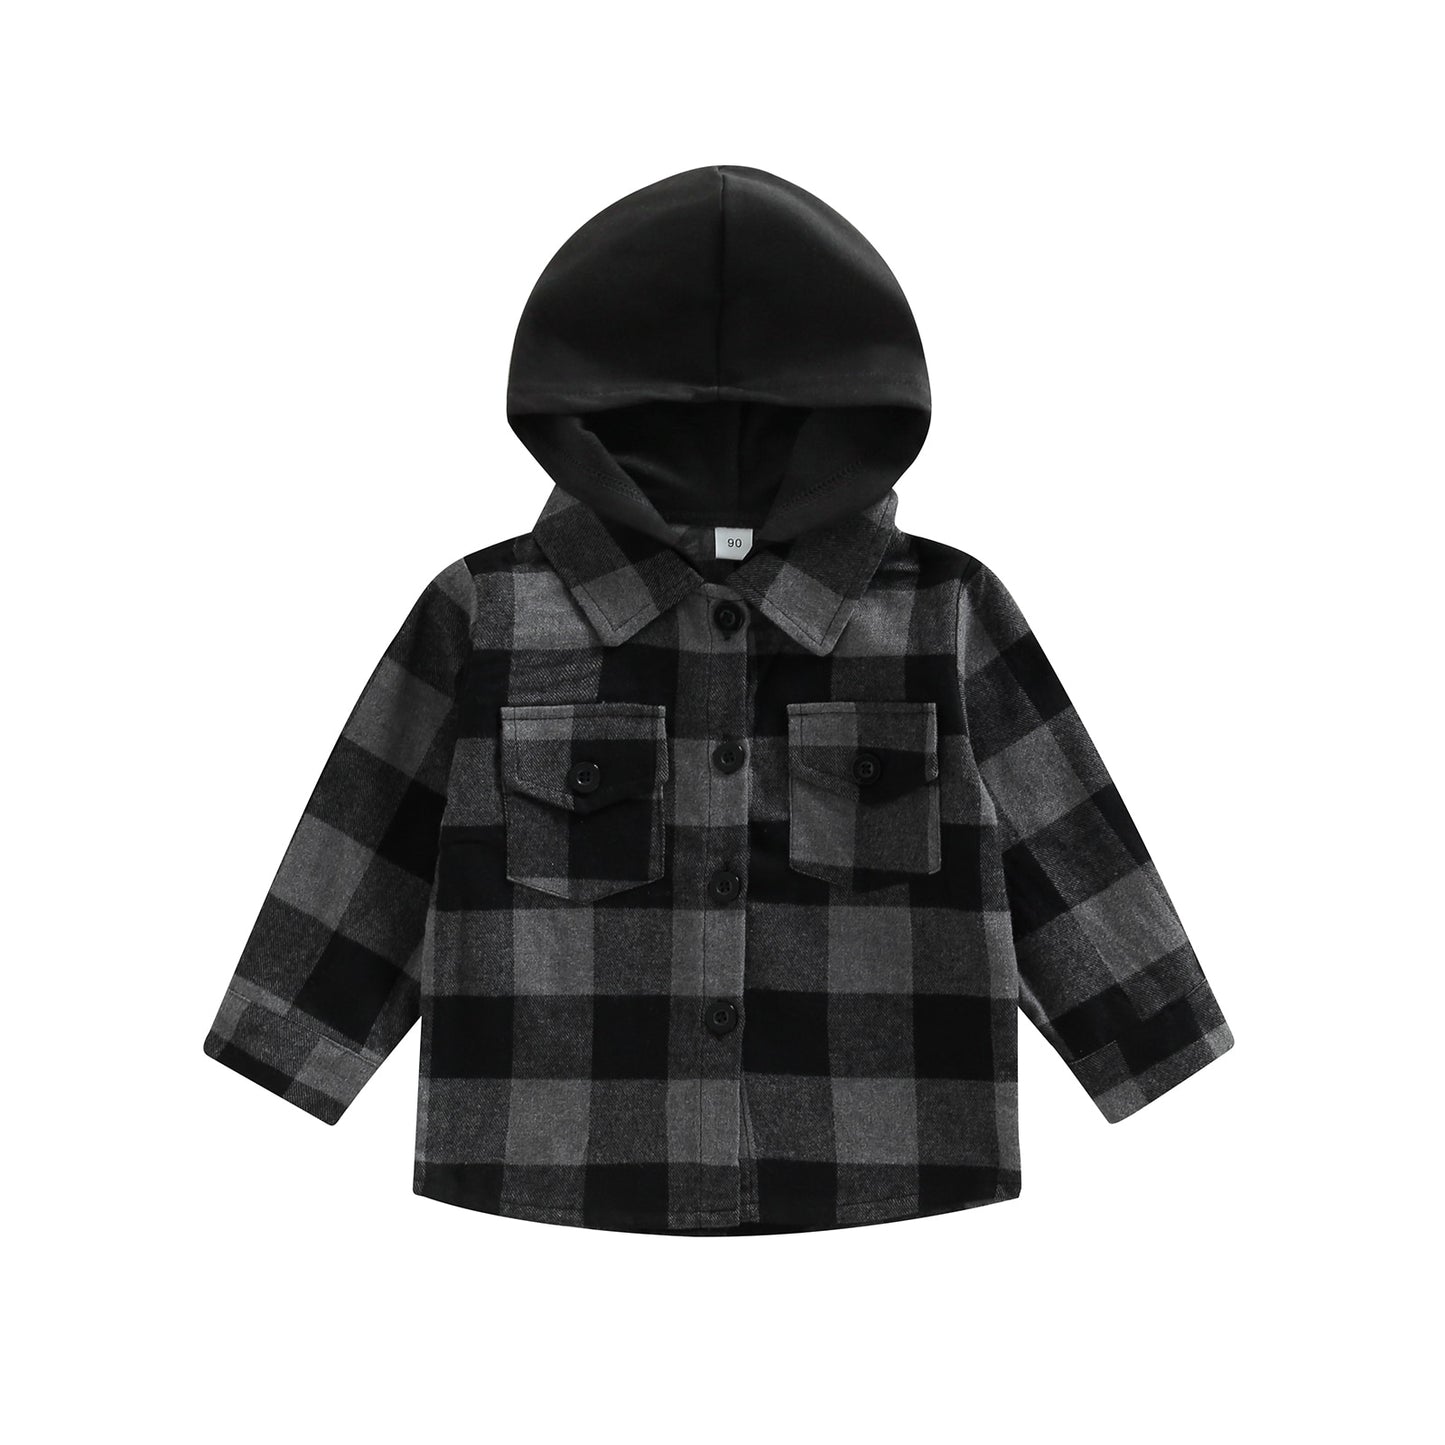 "Sleigh" the Day Hooded Button-Up